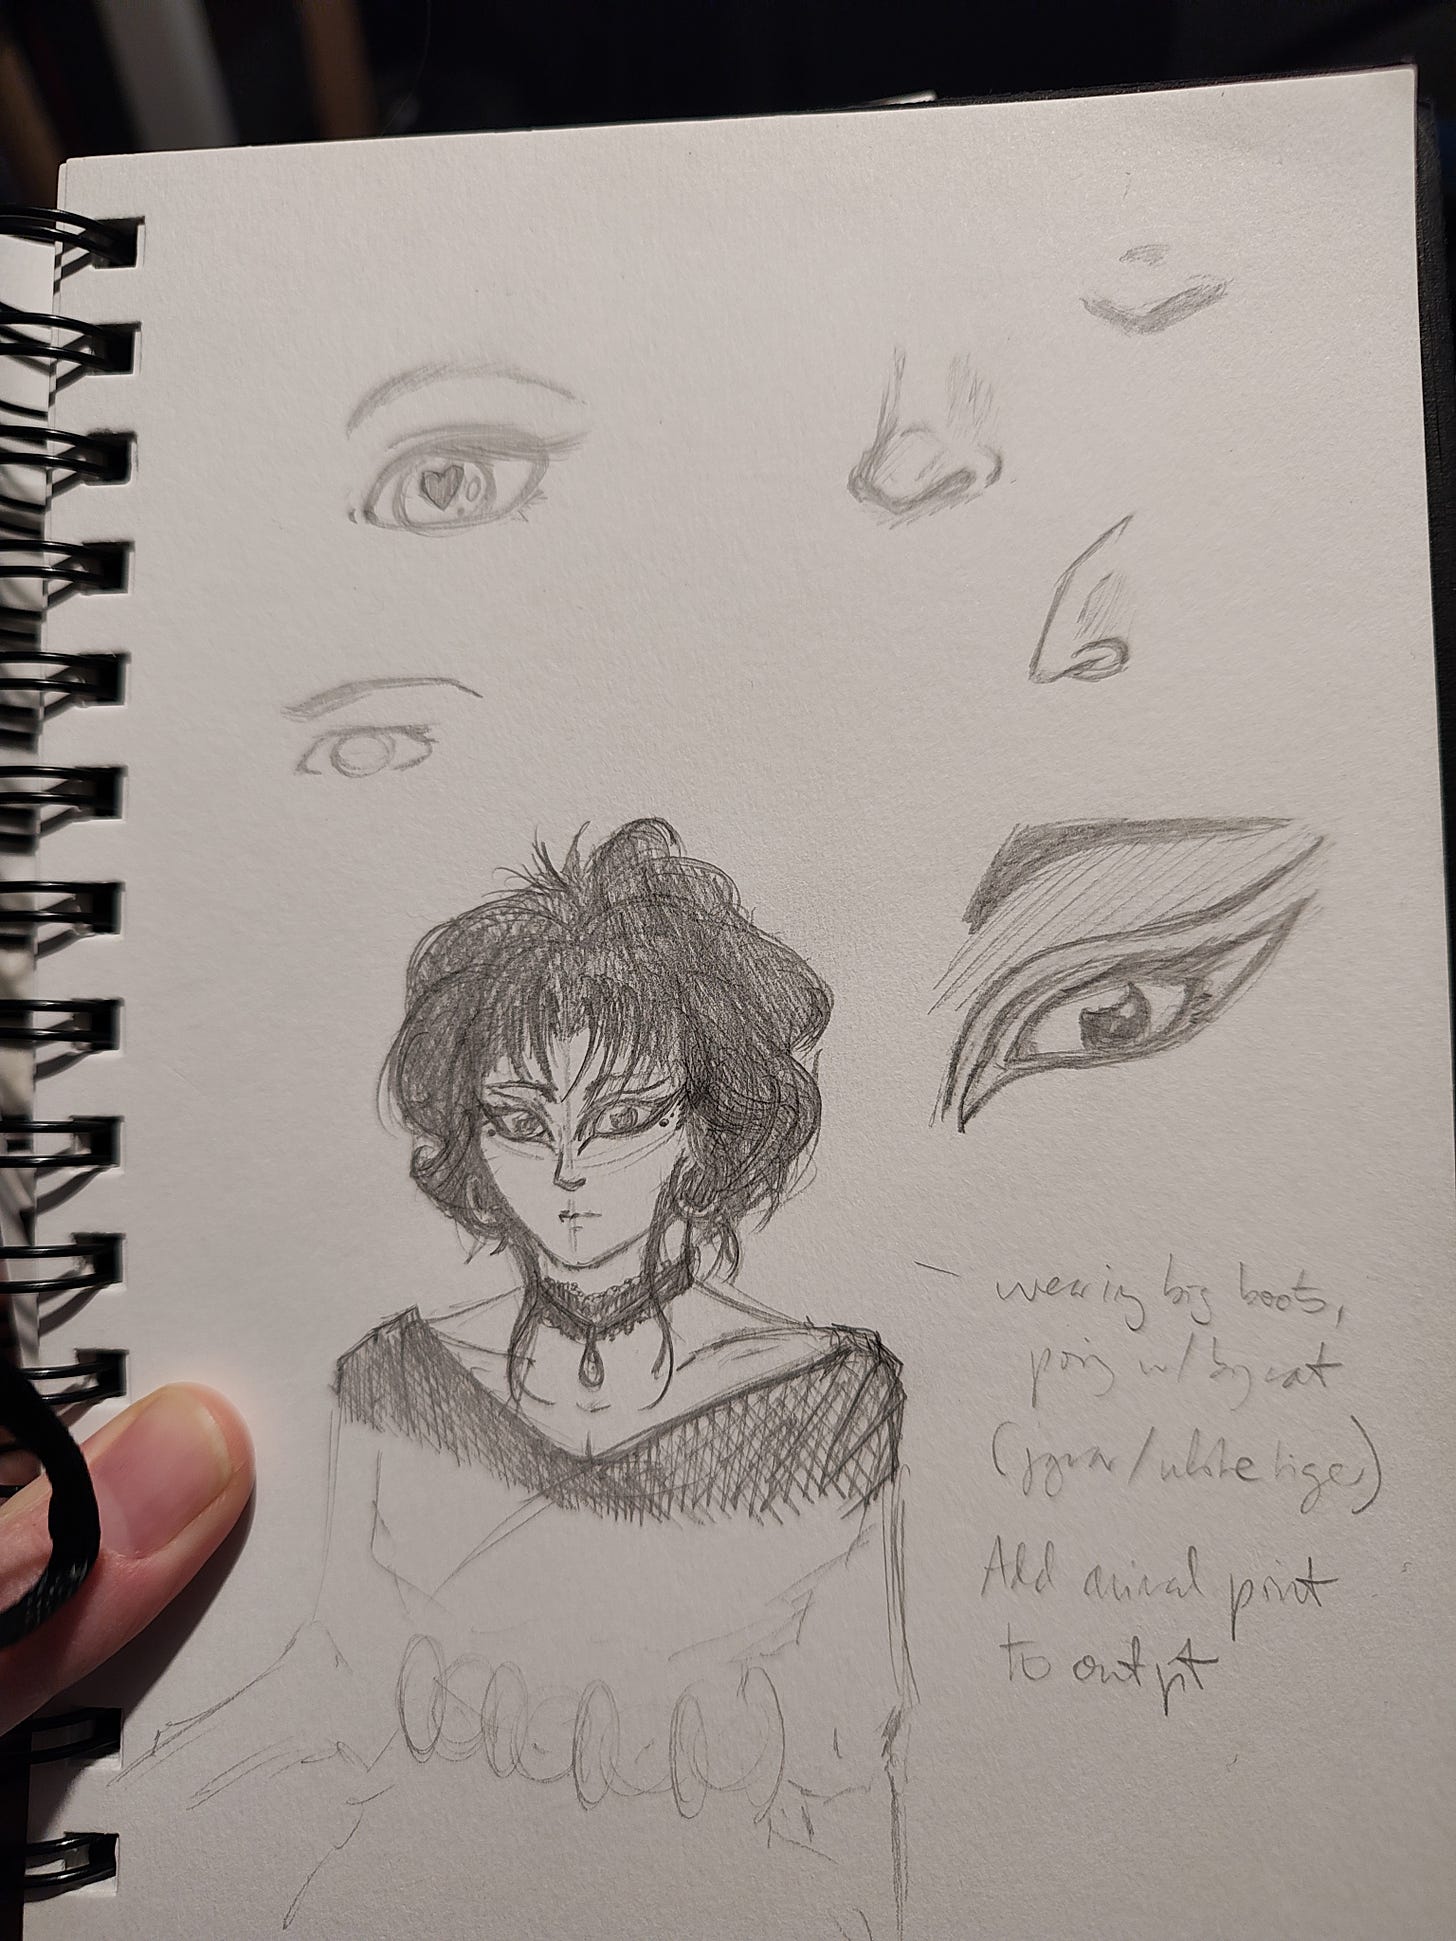 Photo of a sketchbook page showing pencil sketches of eyes, noses, and a lasy in 80s goth style with backcombed hair and heavy eyeliner.